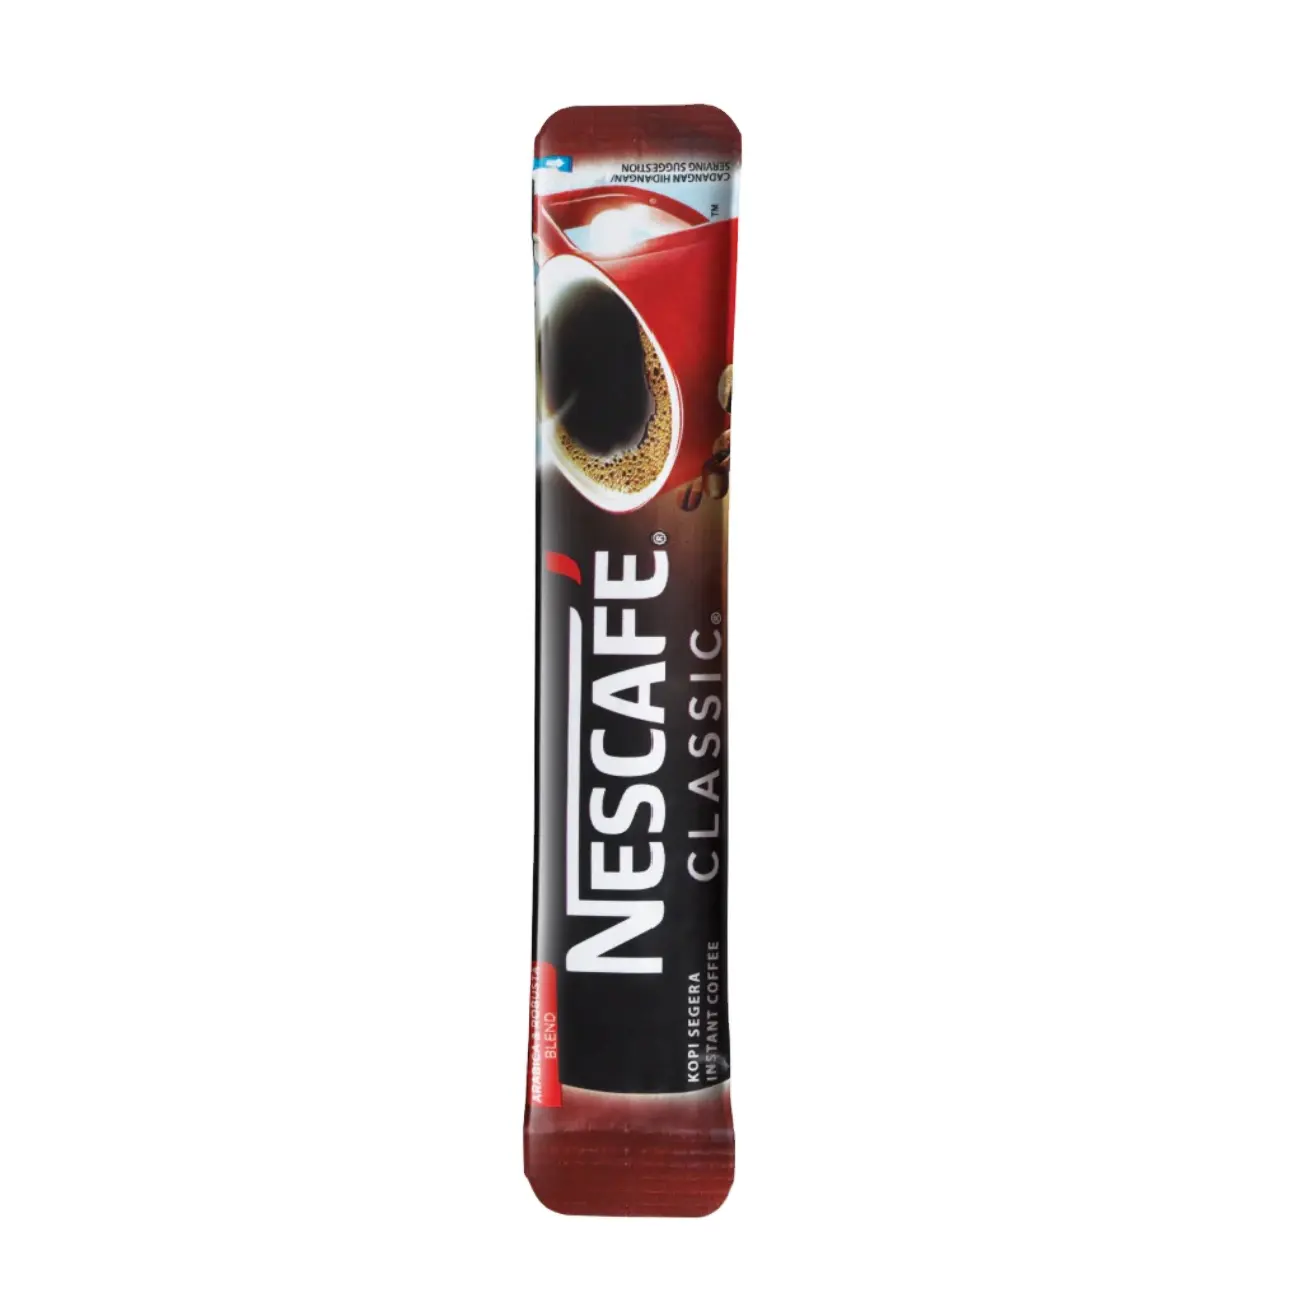 Malaysia Export Sugar-Free NES-CAFE Classic Instant Coffee Stick Mellow Taste Arabica and Robusta Coffee Packaged in Box